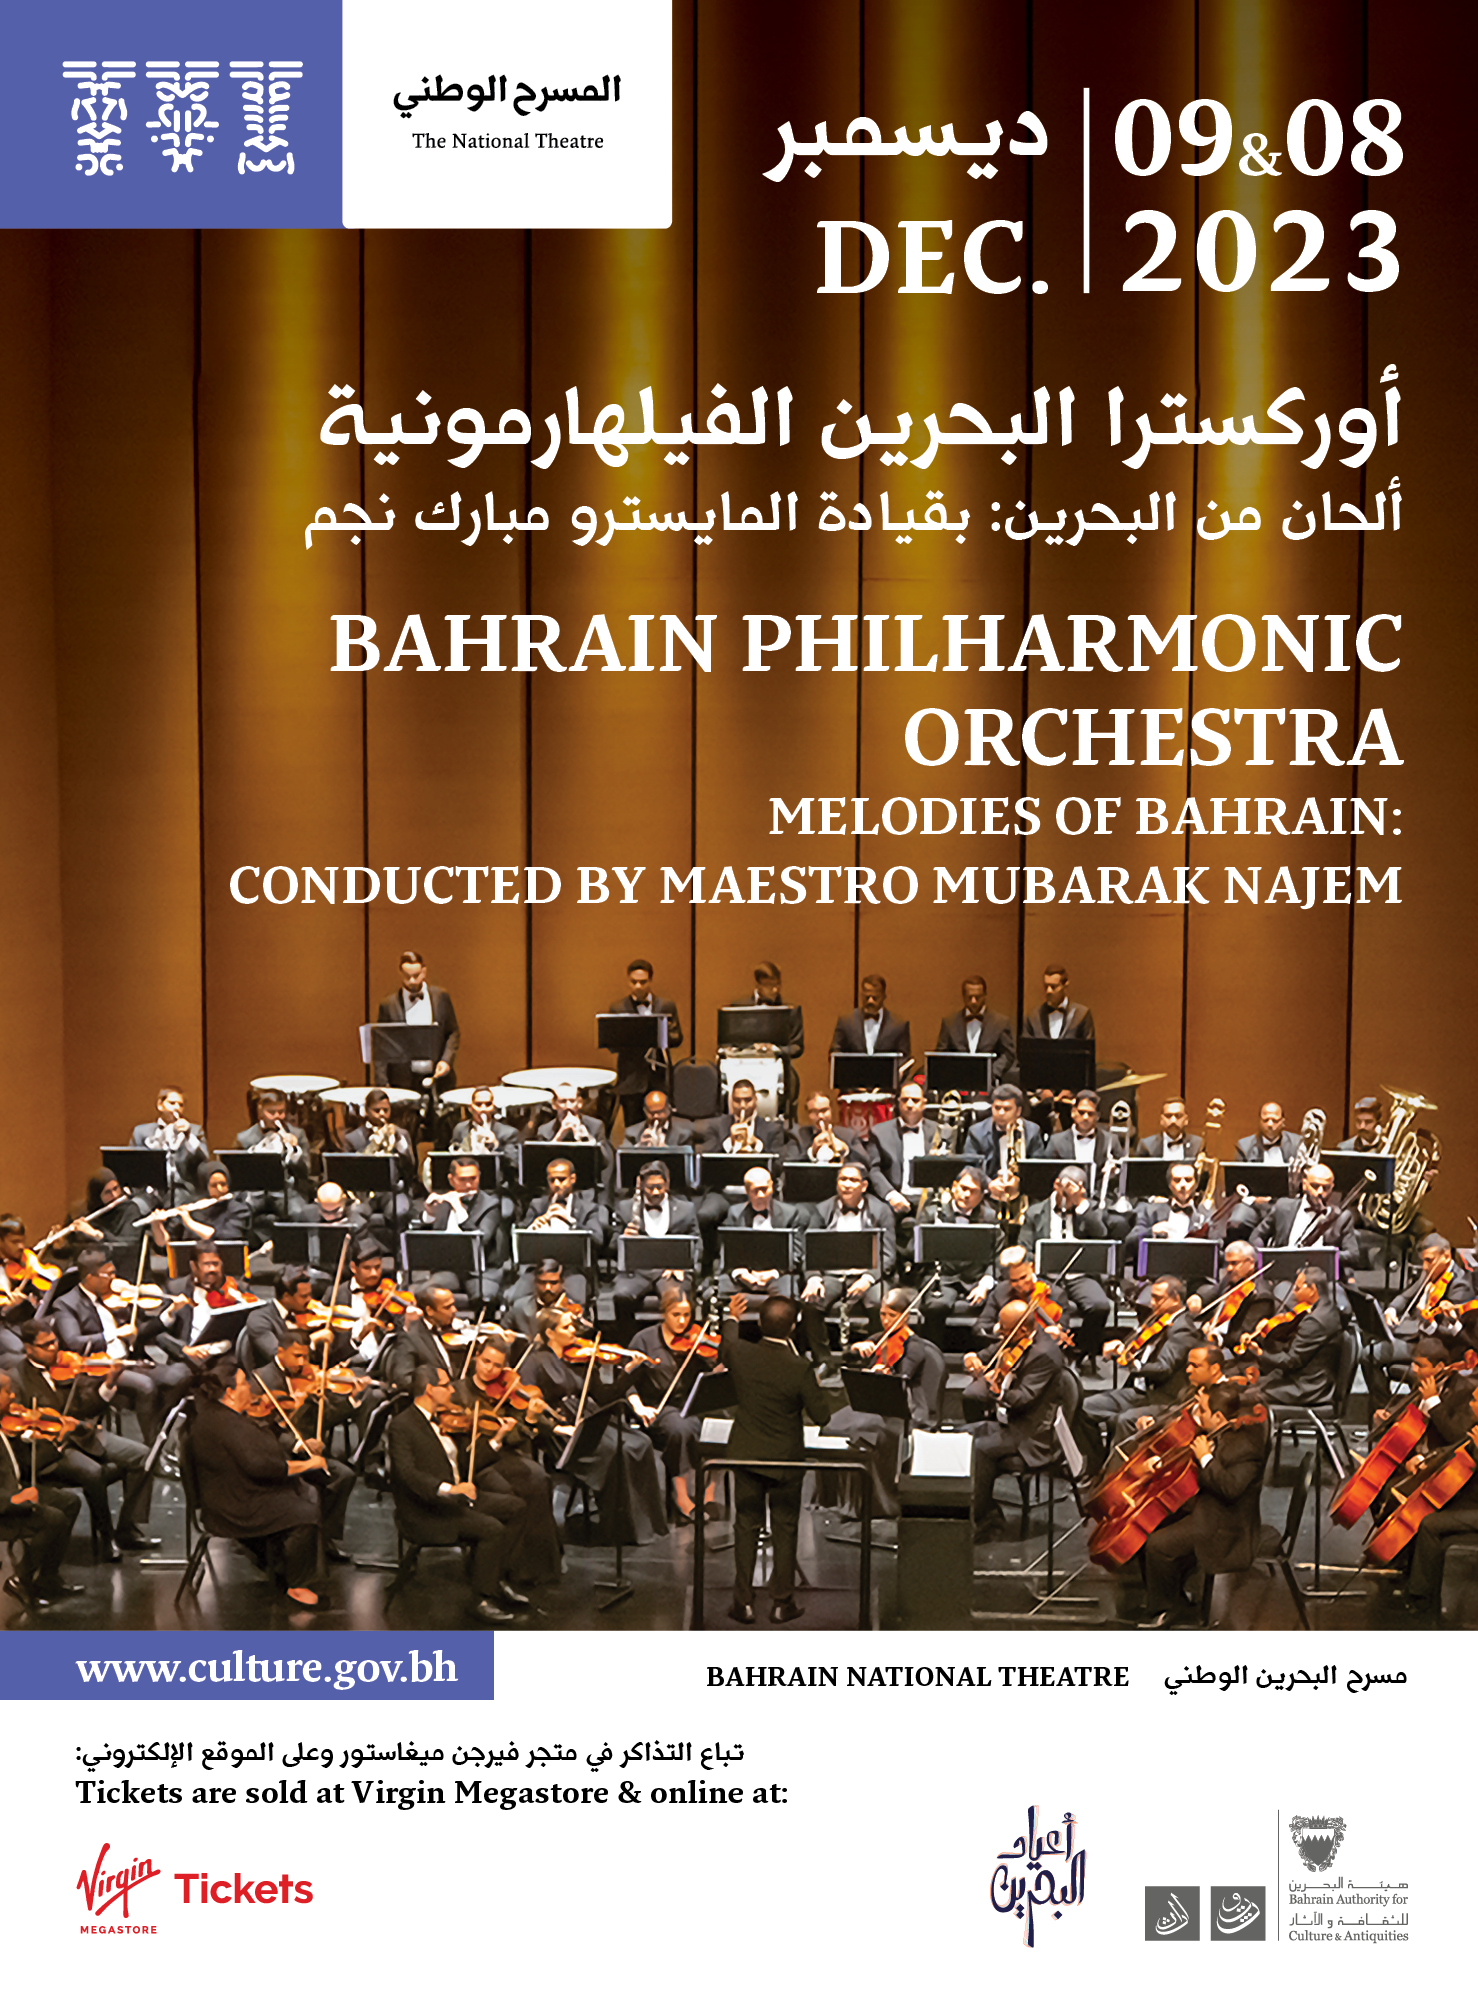 Bahrain Philharmonic Orchestra Melodies of Bahrain: Conducted by Maestro Mubarak Najem poster